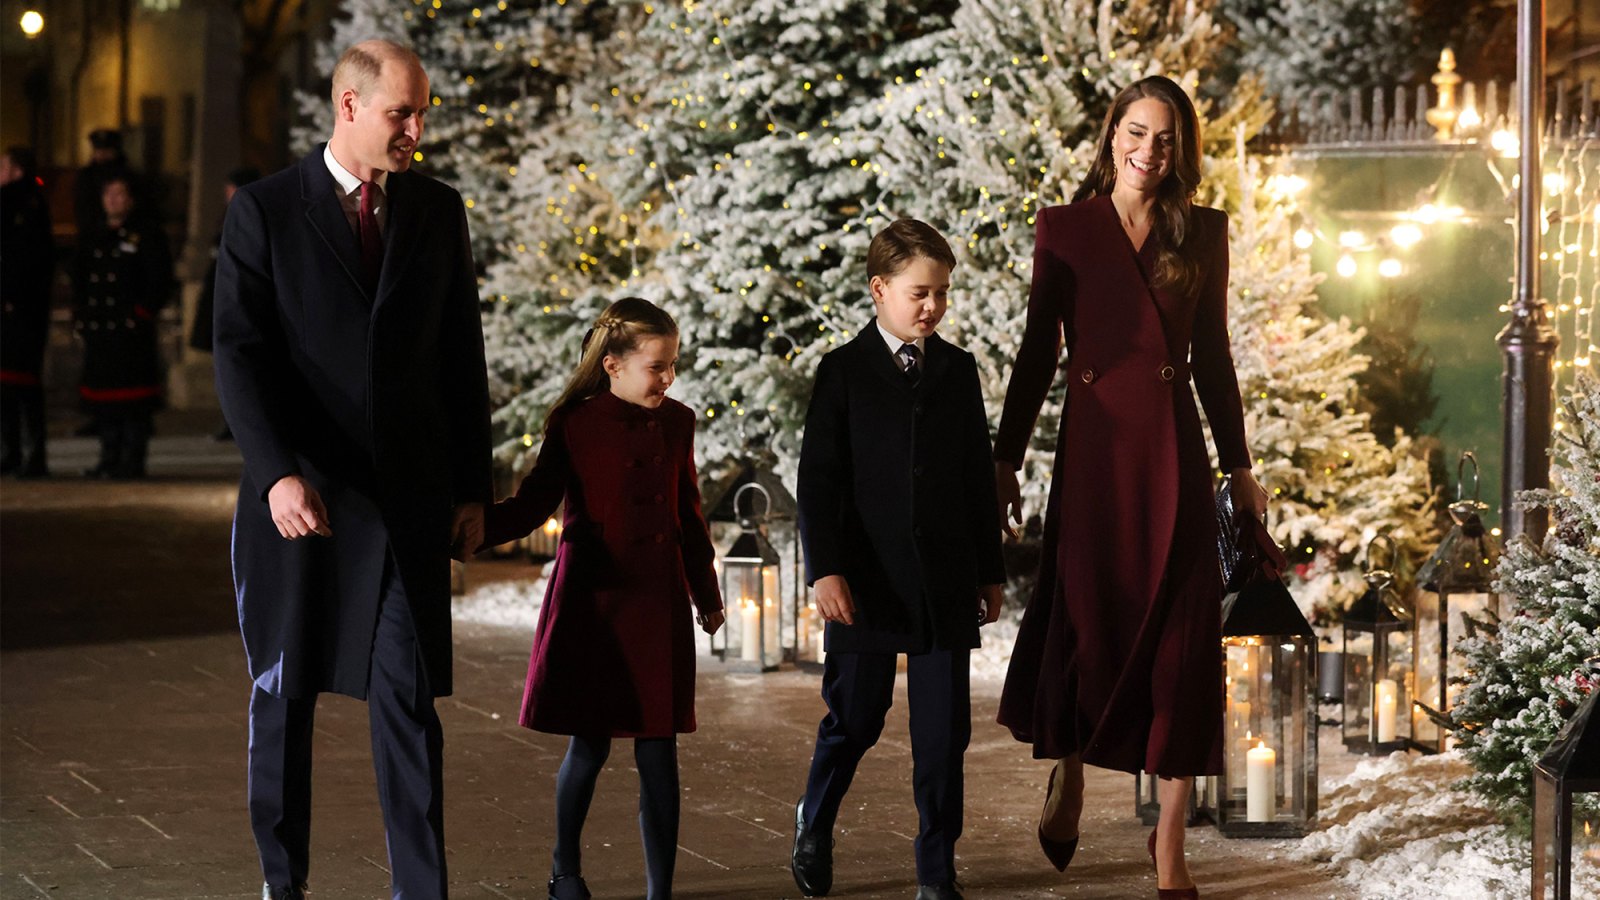 Prince George and Princess Charlotte Match Their Parents at Princess Kate's Christmas Concert - 240 Christmas carol service at Westminster Abbey, London, UK - 15 Dec 2022